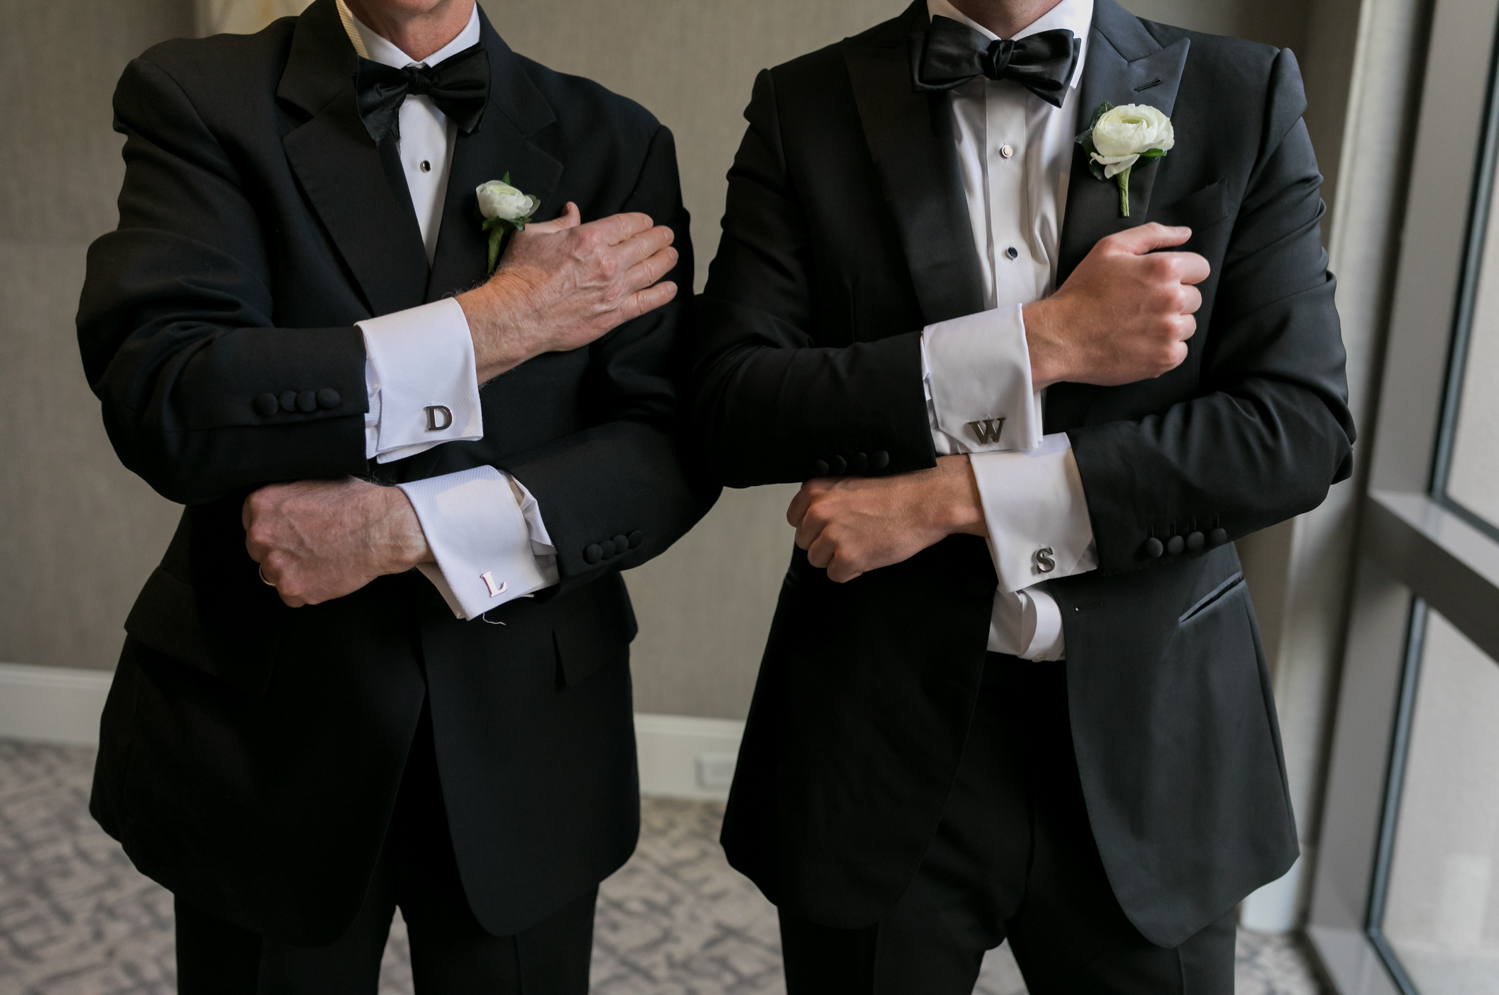 The groom and his father show off their custom monogrammed cufflinks.